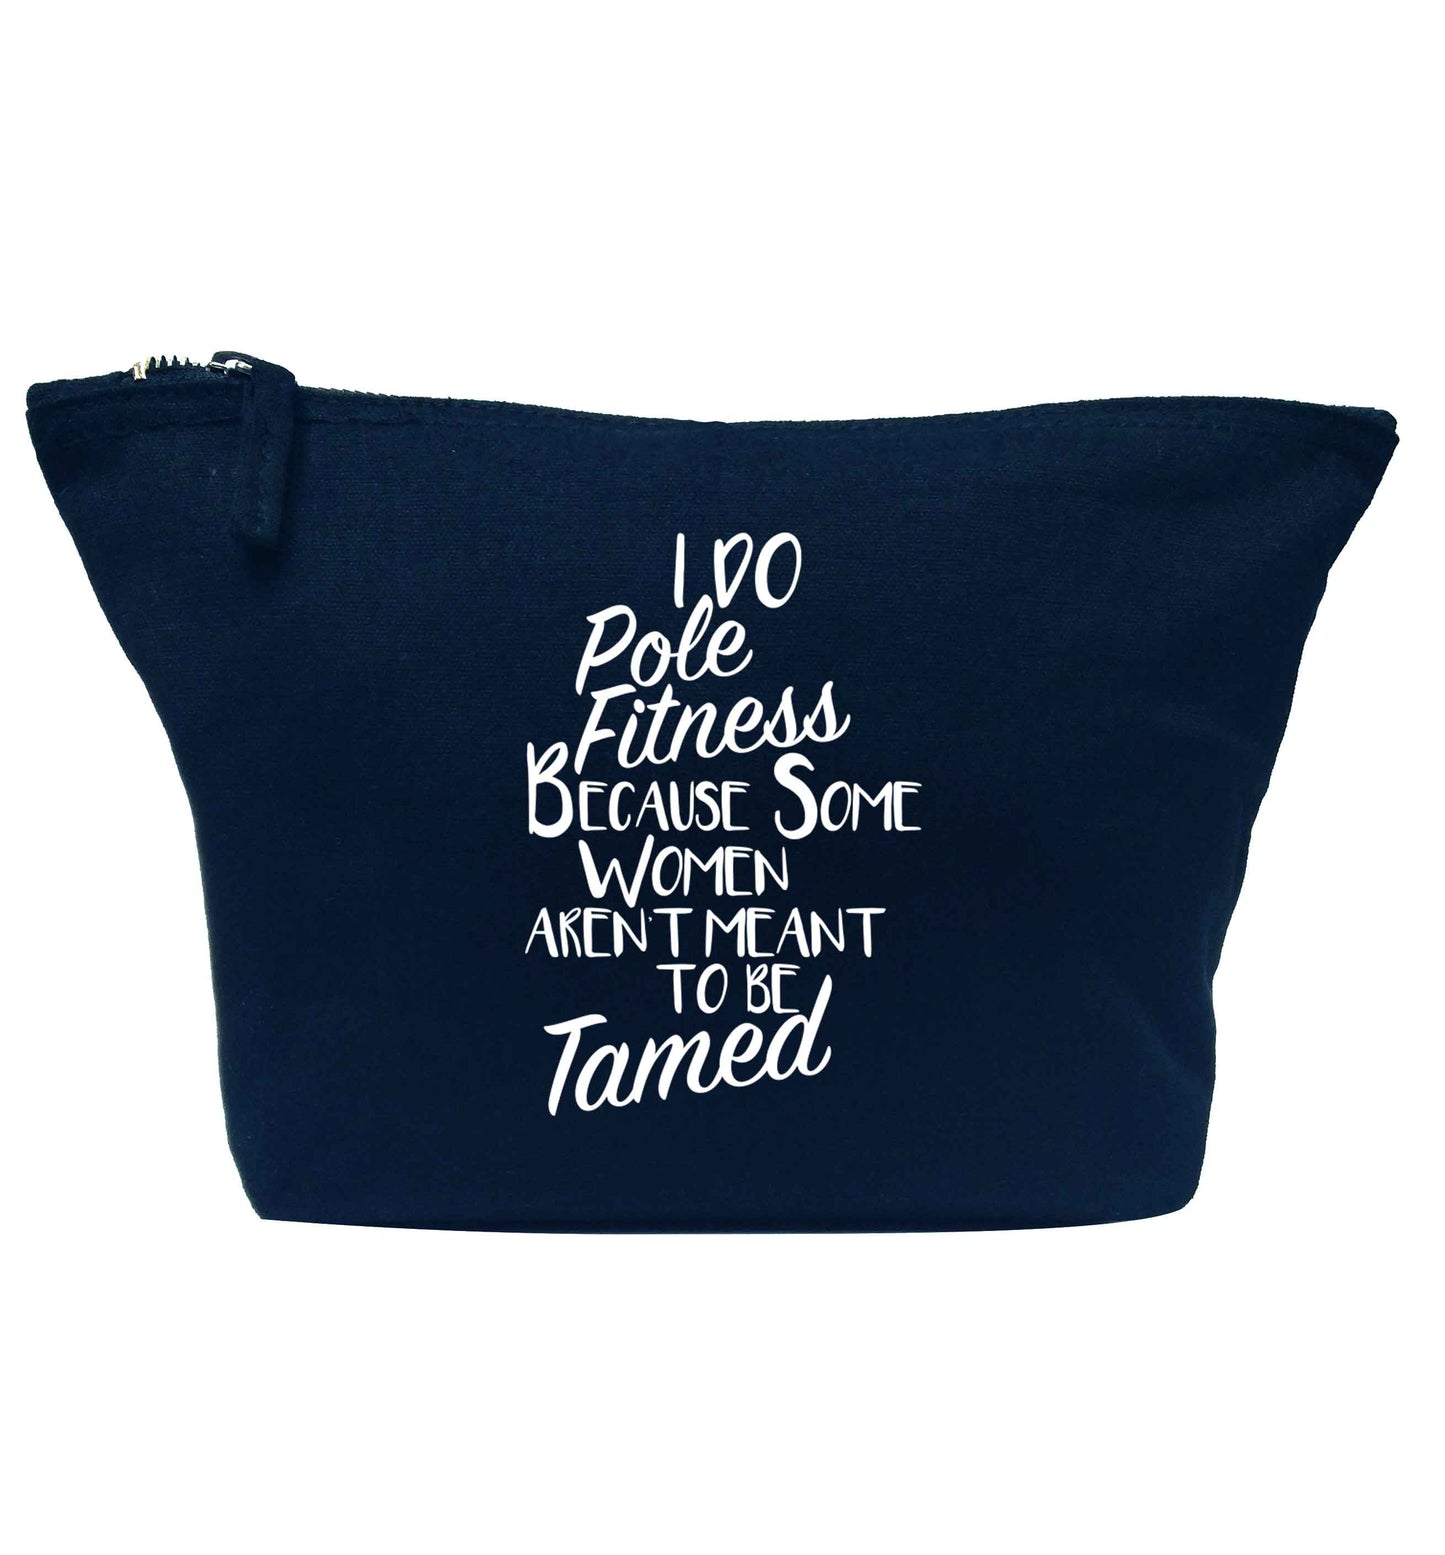 I do pole fitness because some women aren't meant to be tamed navy makeup bag